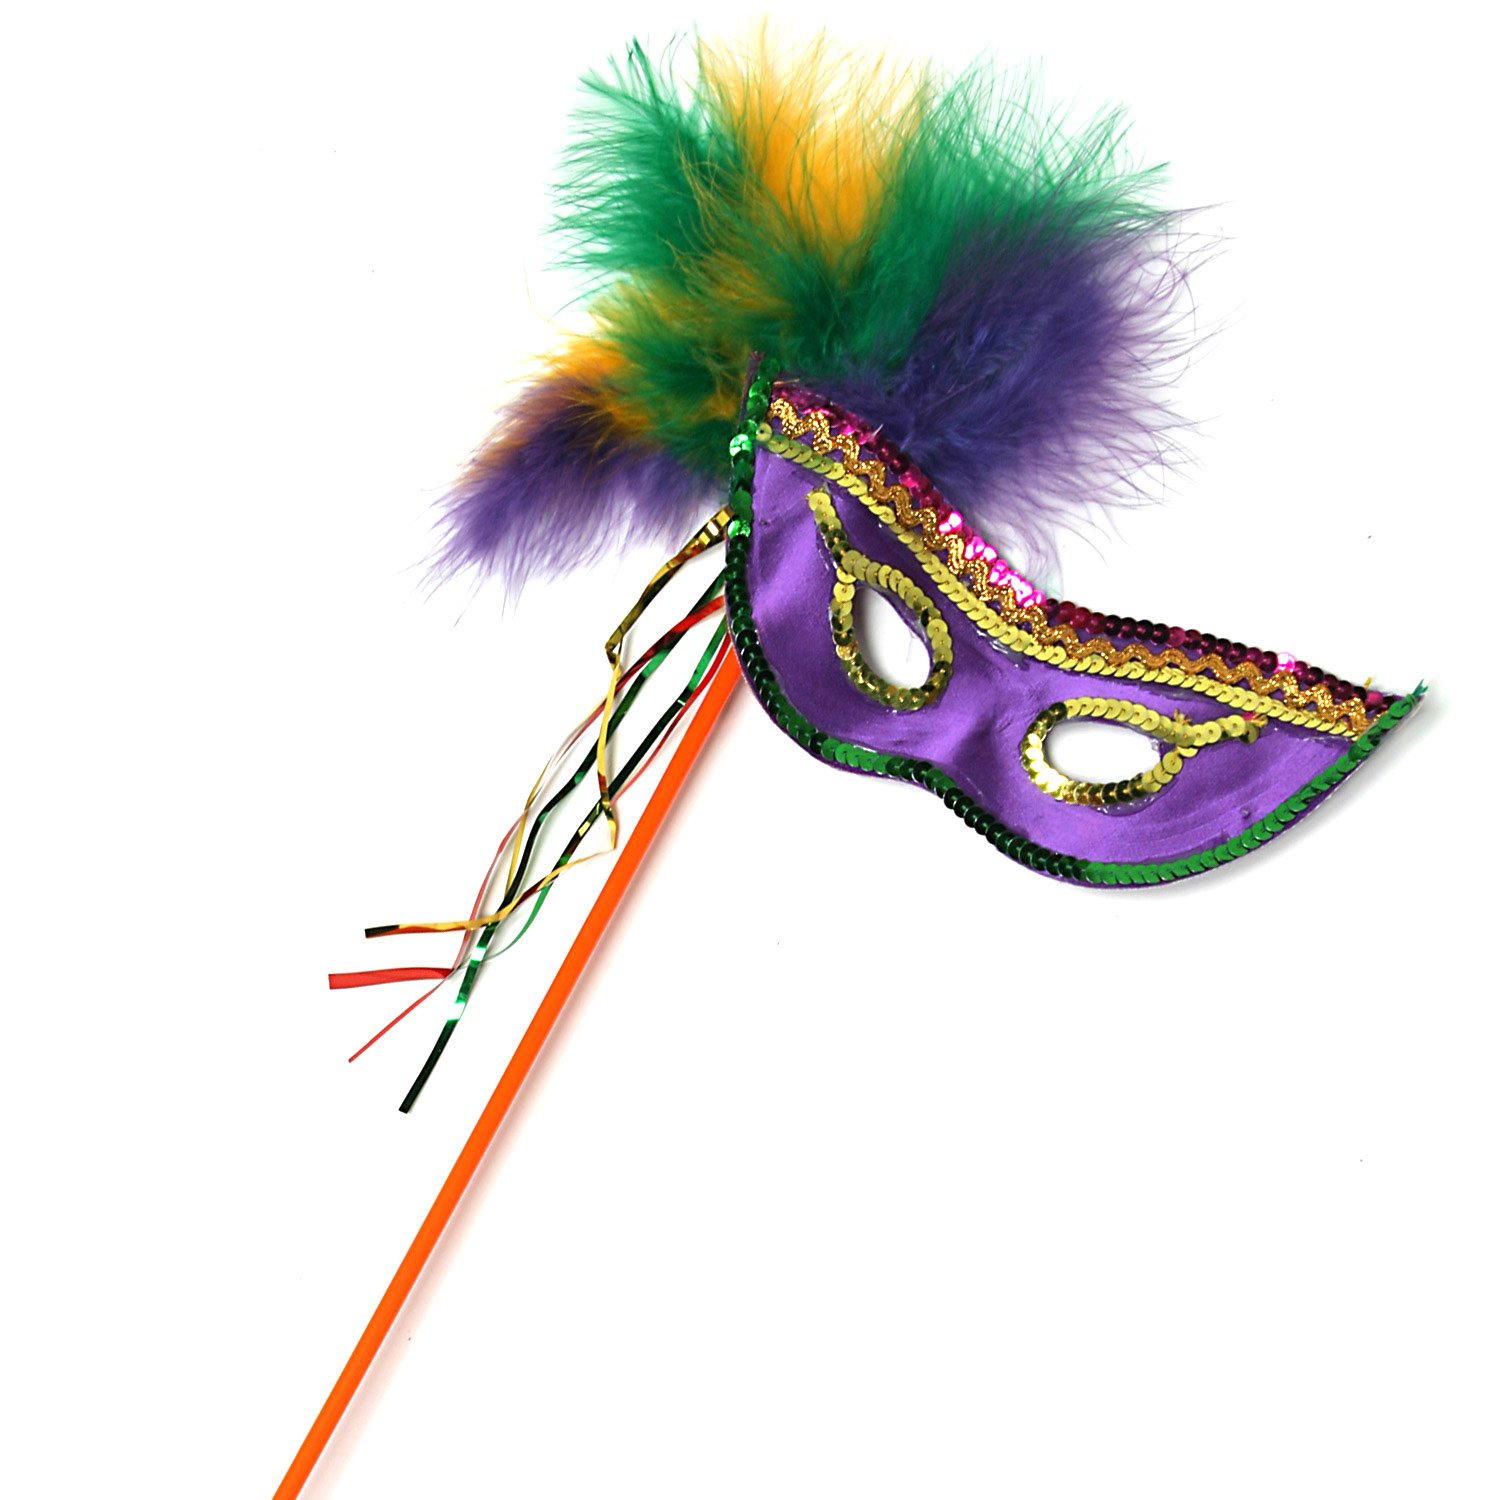 Forrst | Mardi Gras Rentals - A post from Oiseau